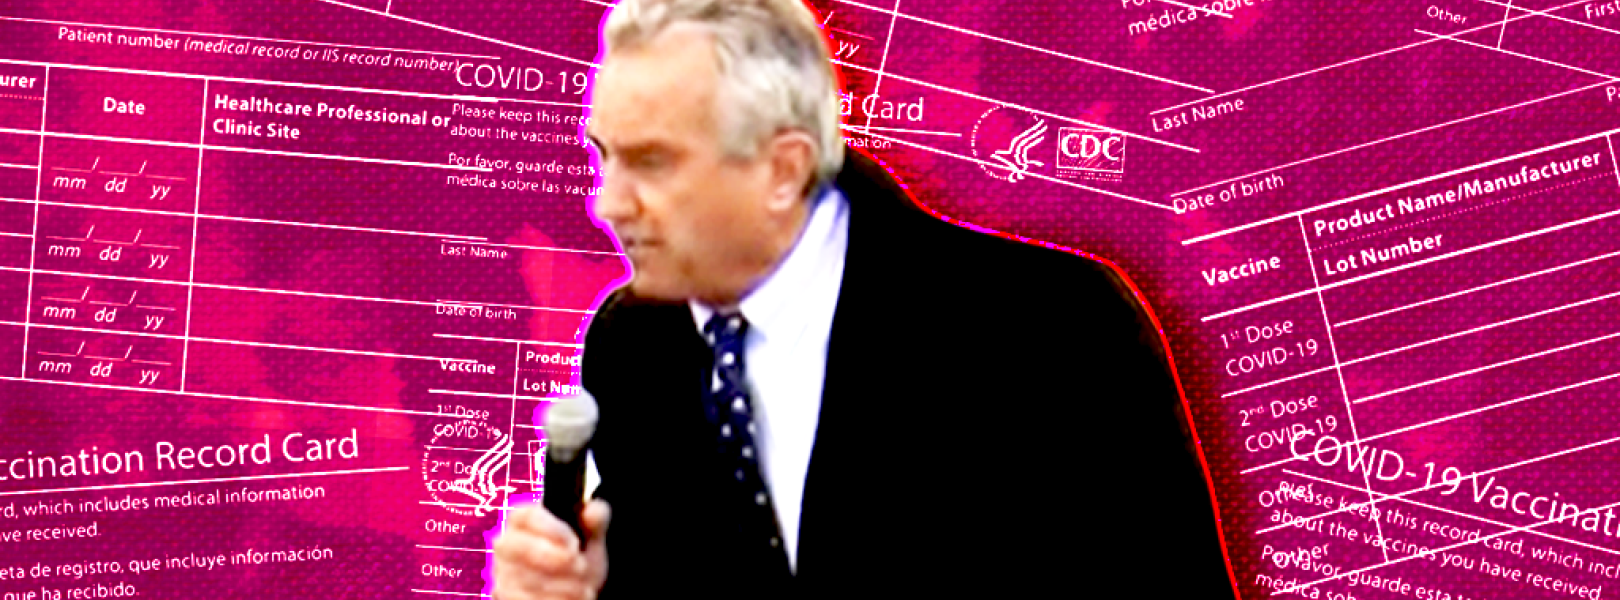 Rfk Jr infront of a fiducia background with images of ballots